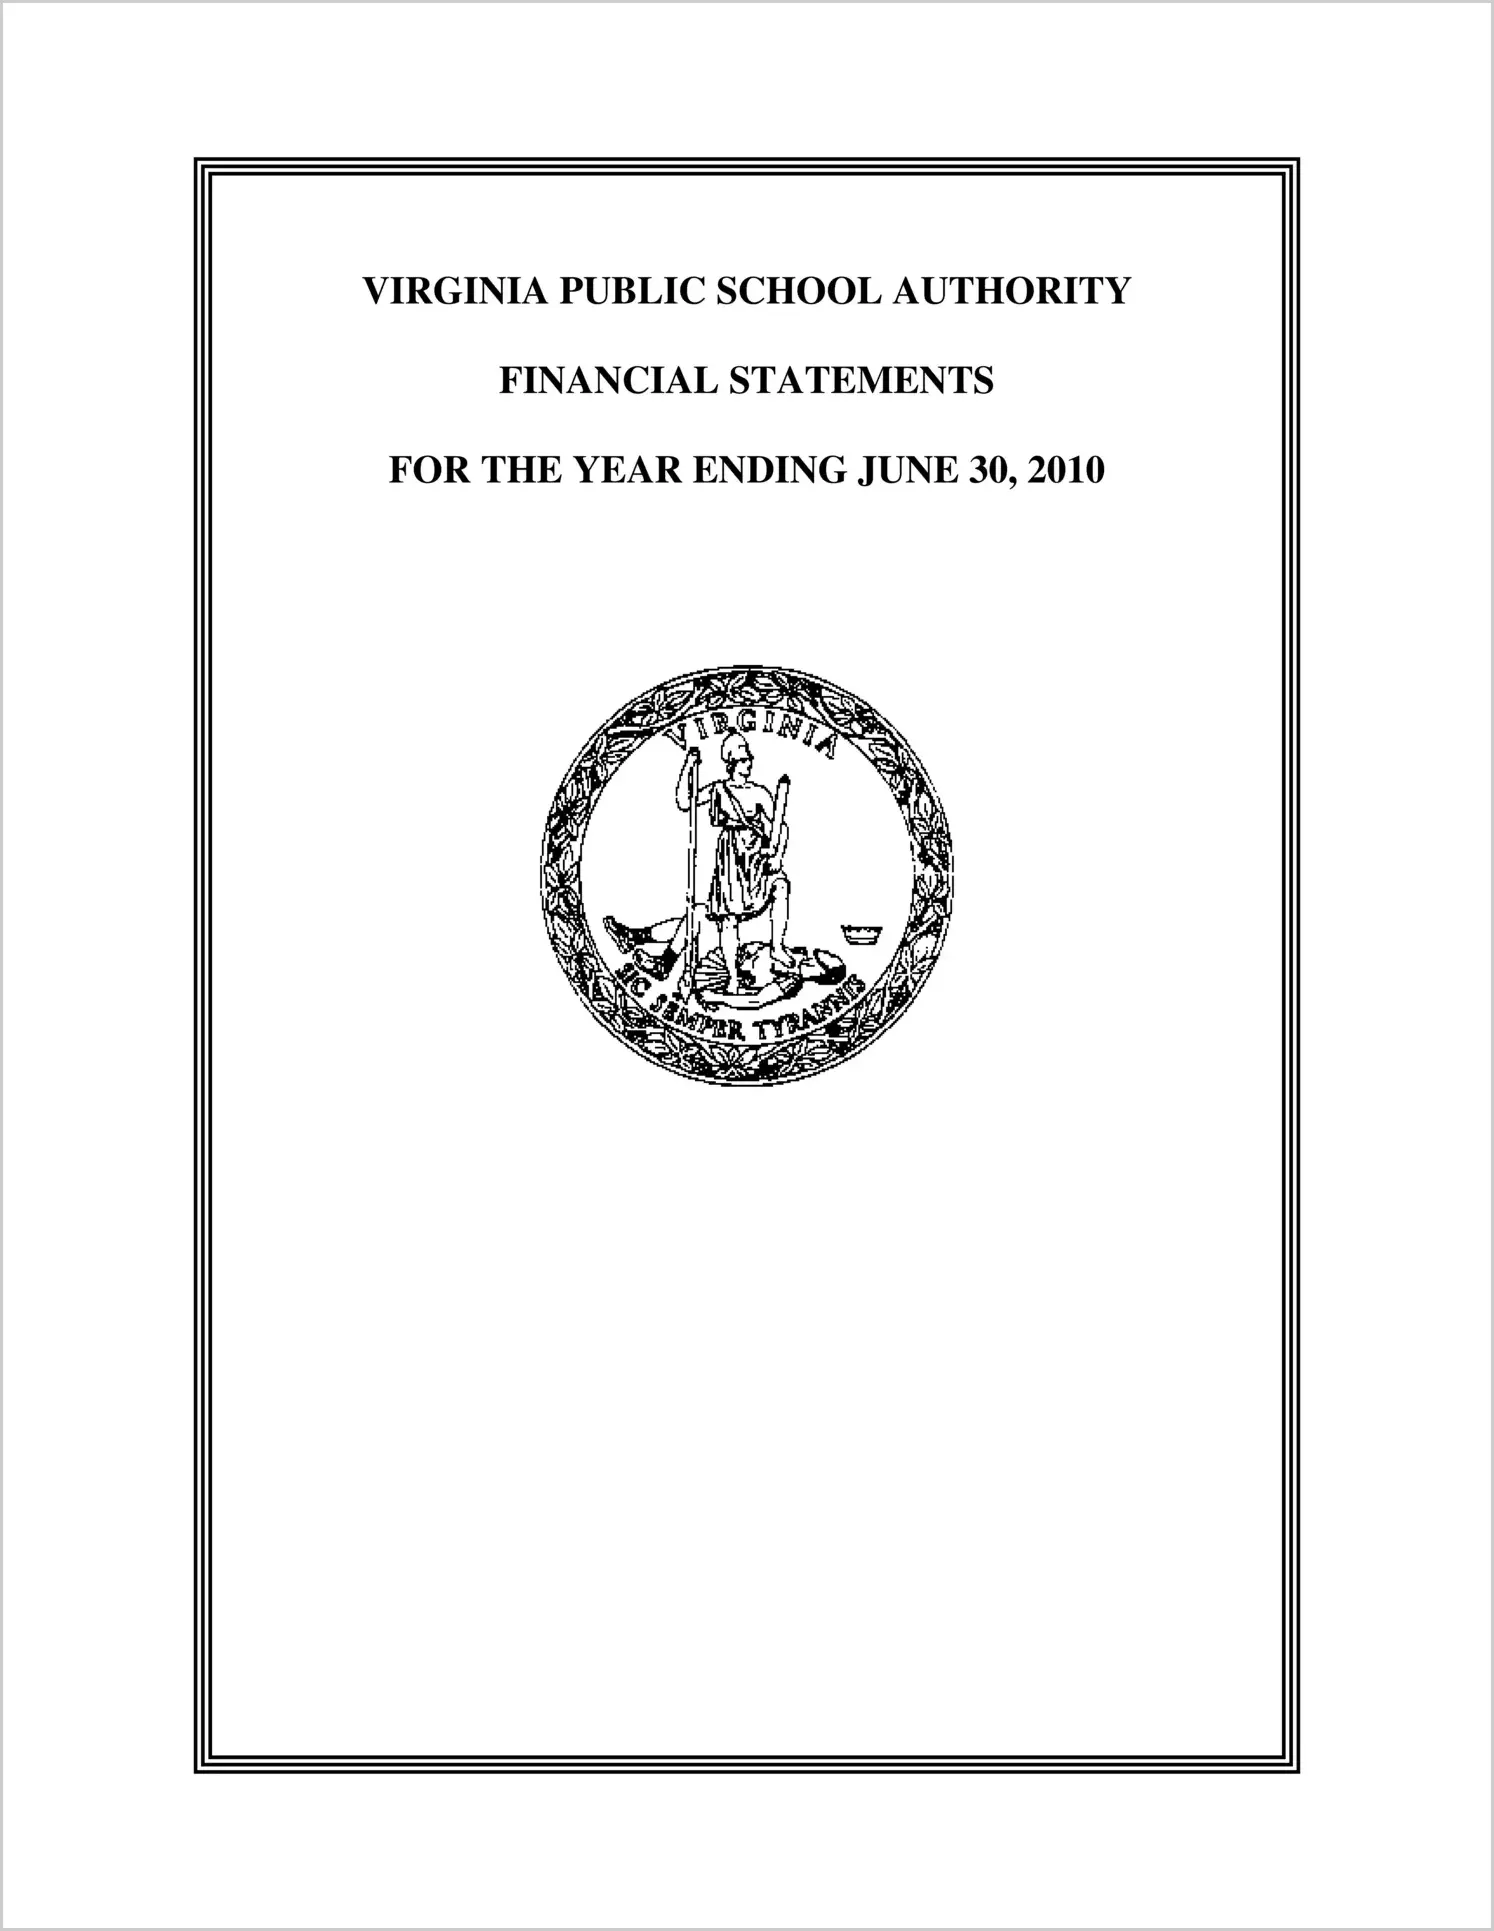 Virginia Public School Authority for the year ended June 30, 2010